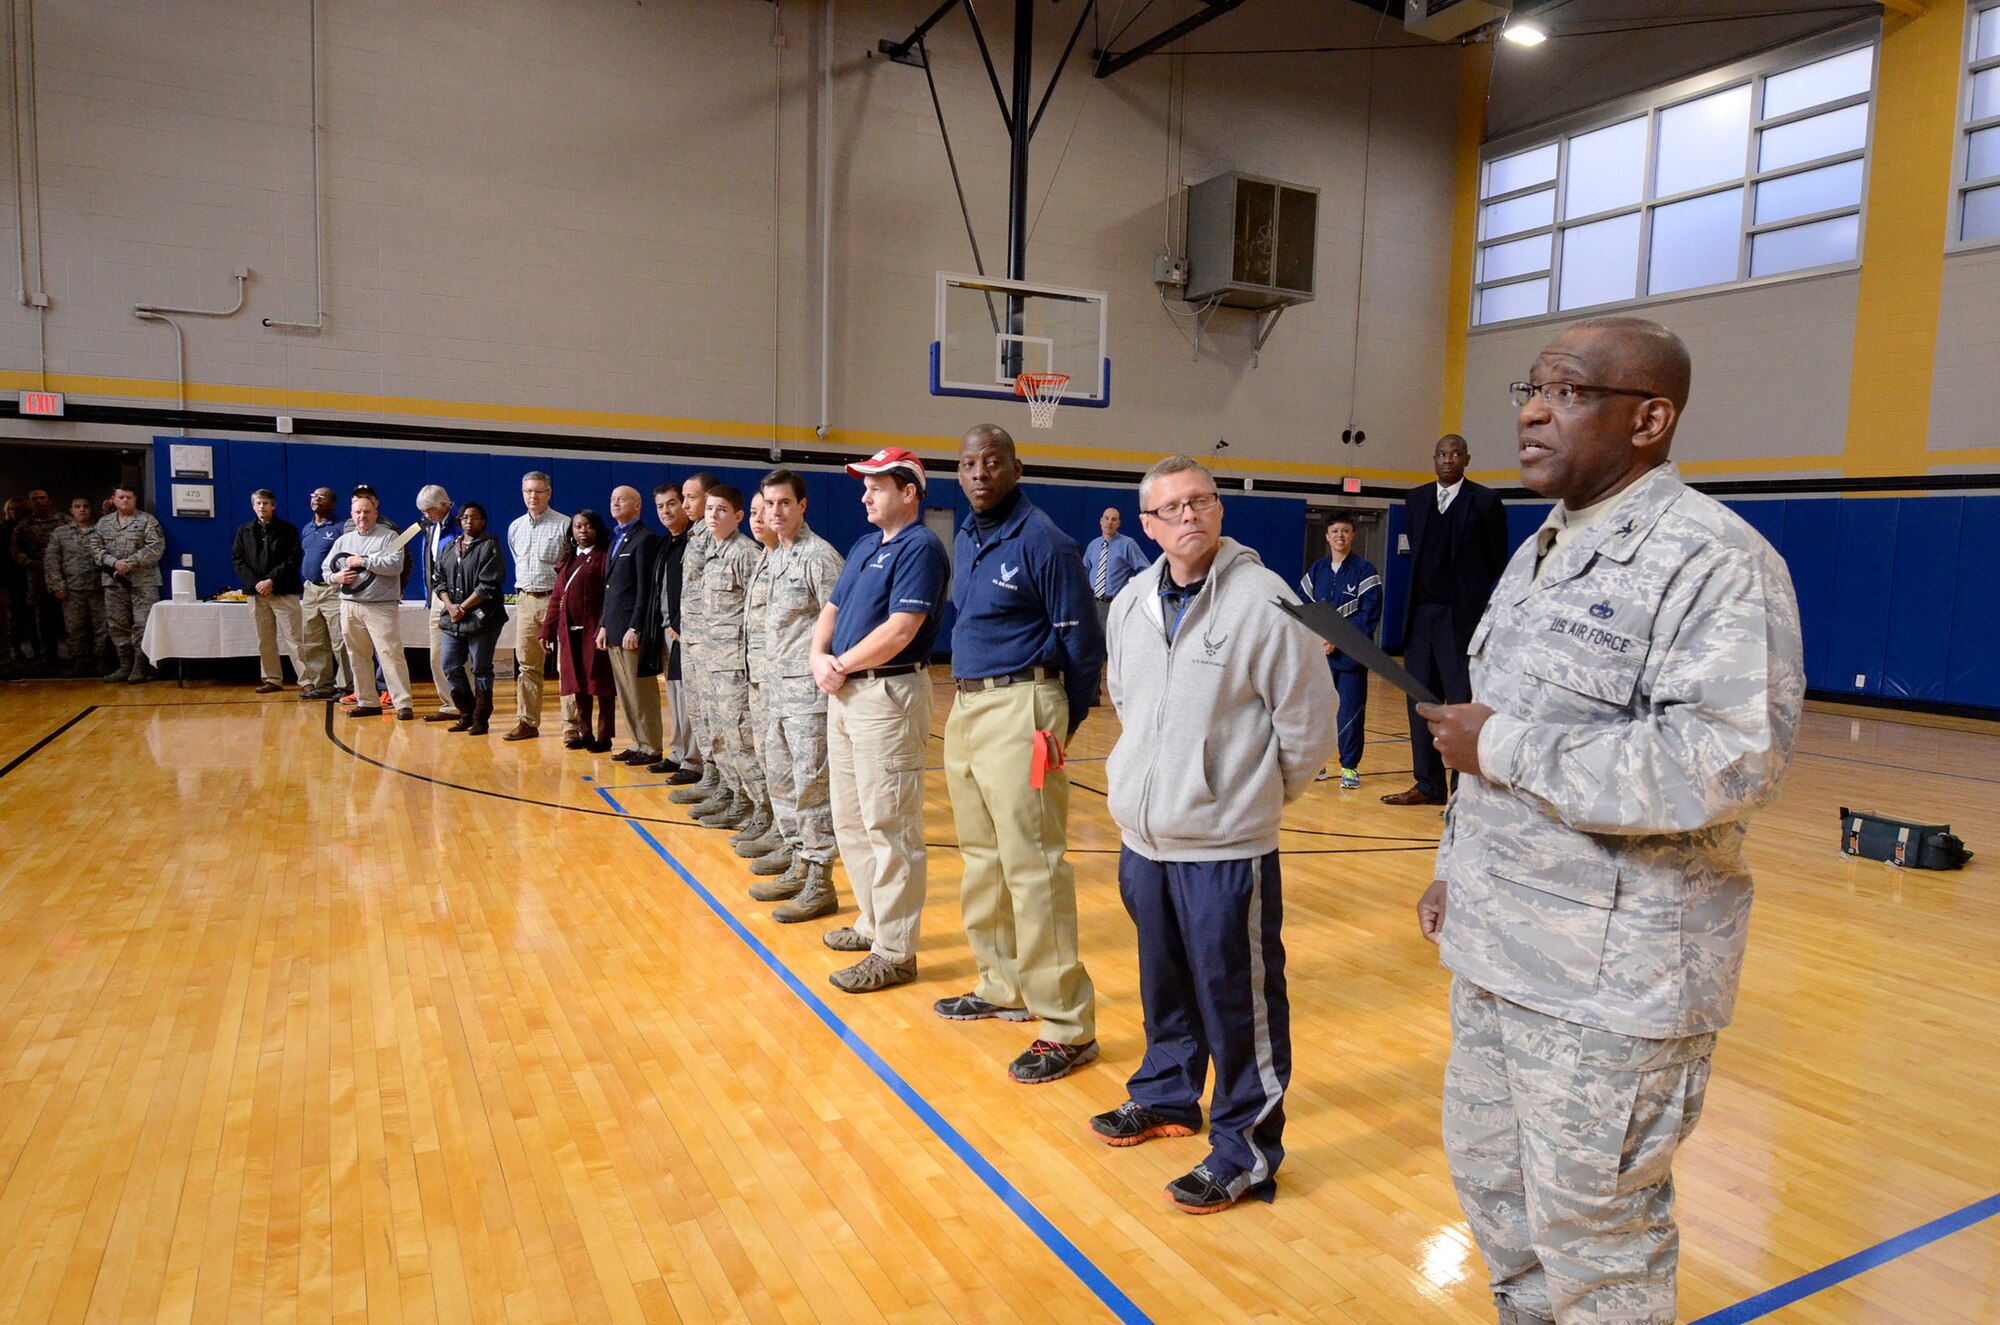 Col. Marshall Irvin, 94th Missions Support Group commander, recognizes those that helped bring the renovated fitness center to fruition at Dobbins Air Reserve Base, Ga. Nov. 18, 2014. The fitness center includes approximately 30 new pieces of equipment. (U.S. Air Force photo by Don Peek/Released)